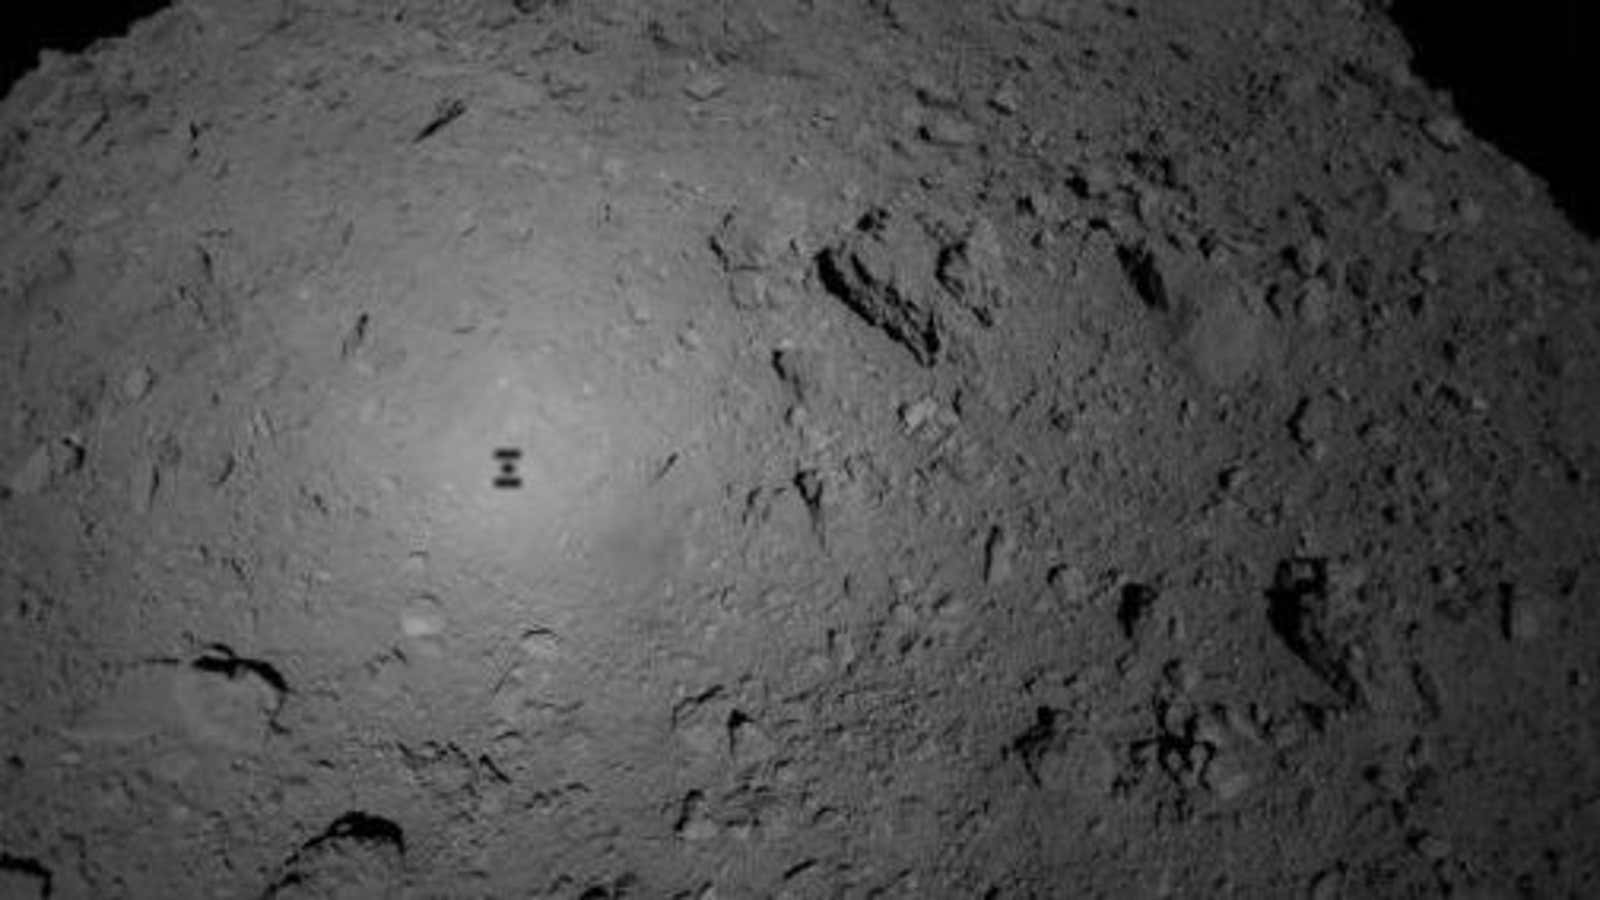 A Japanese space probe captured a shadow selfie on the surface of an asteroid